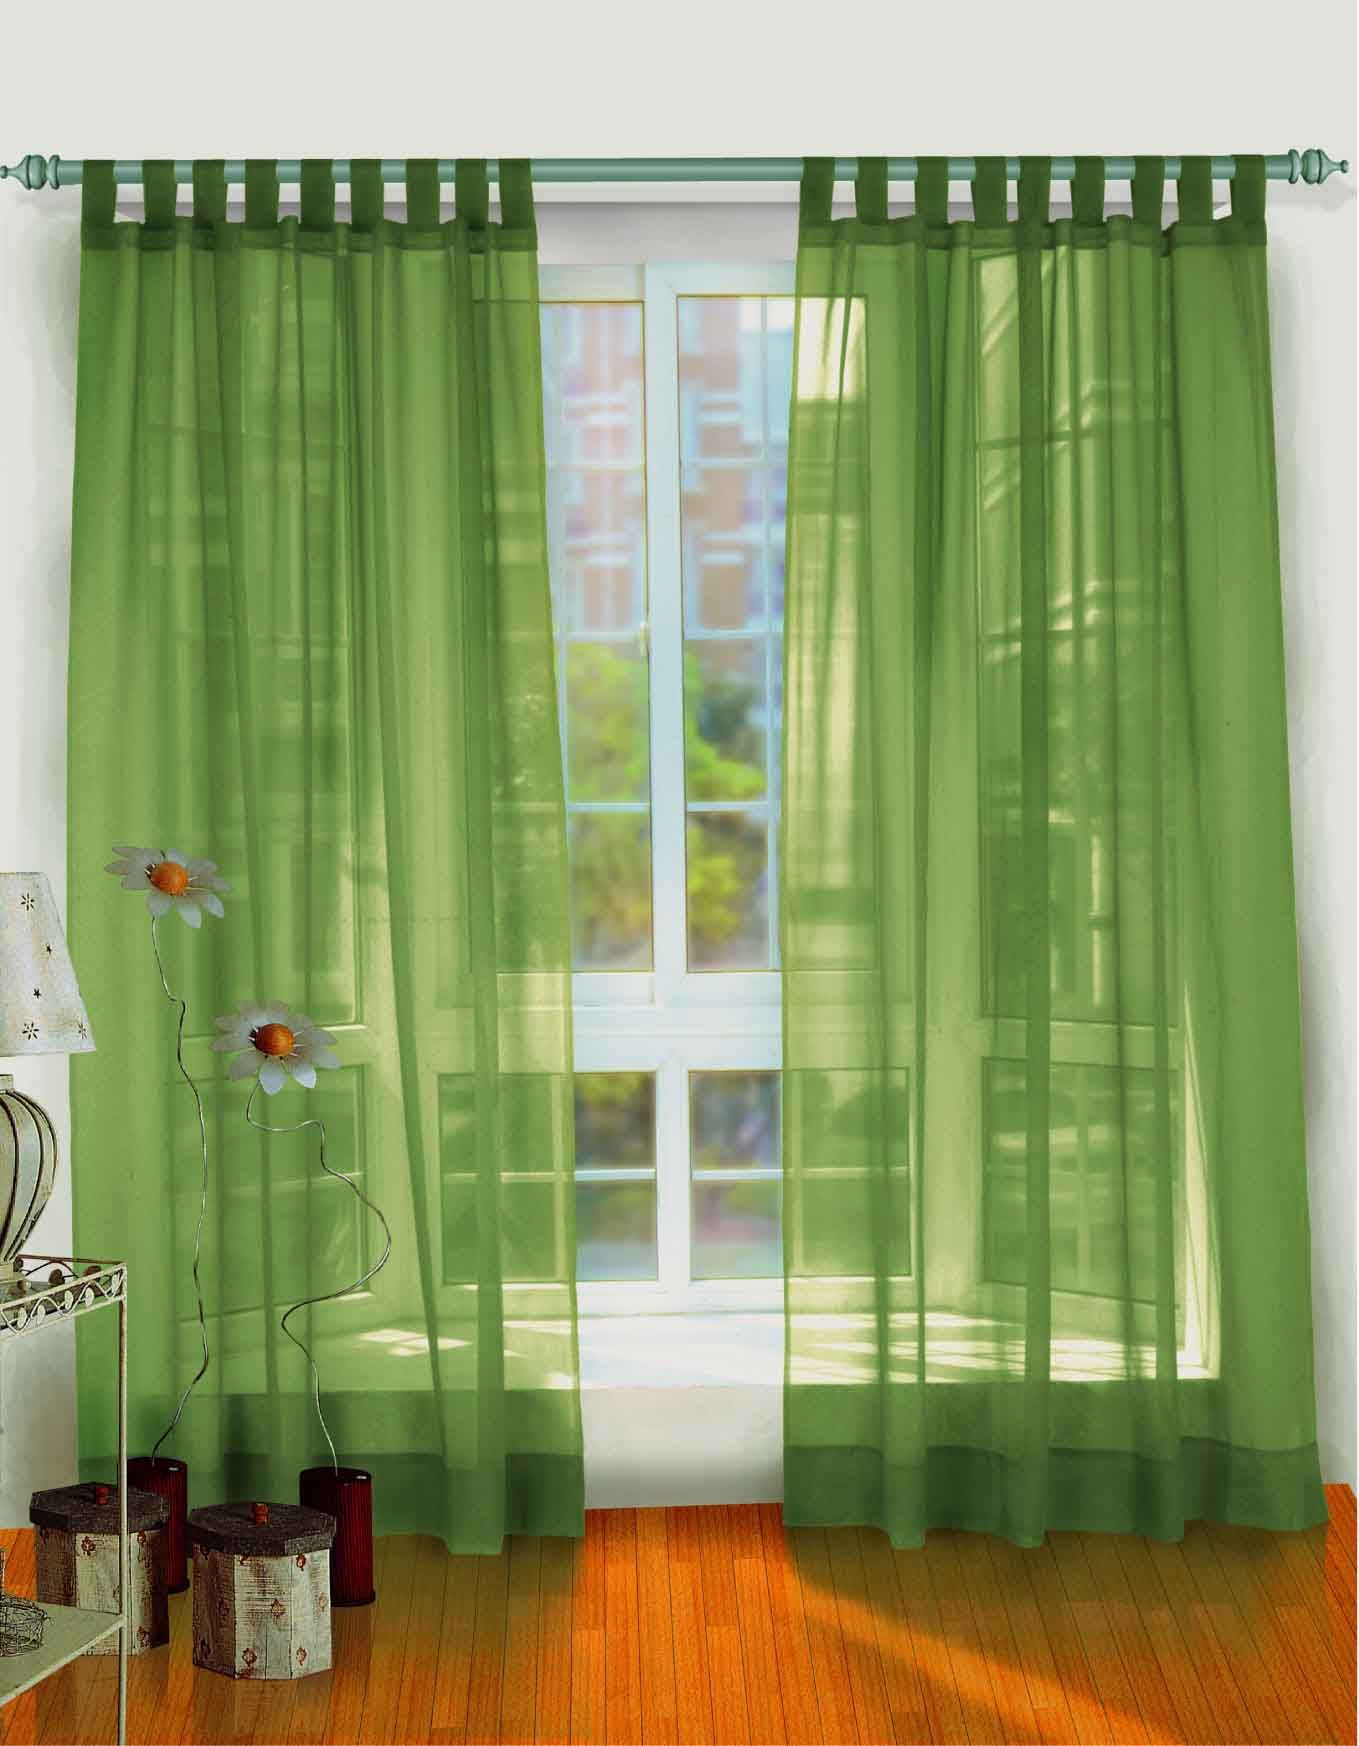 Enticing Bedroom Curtain For Beautiful Window Treatment Ideas